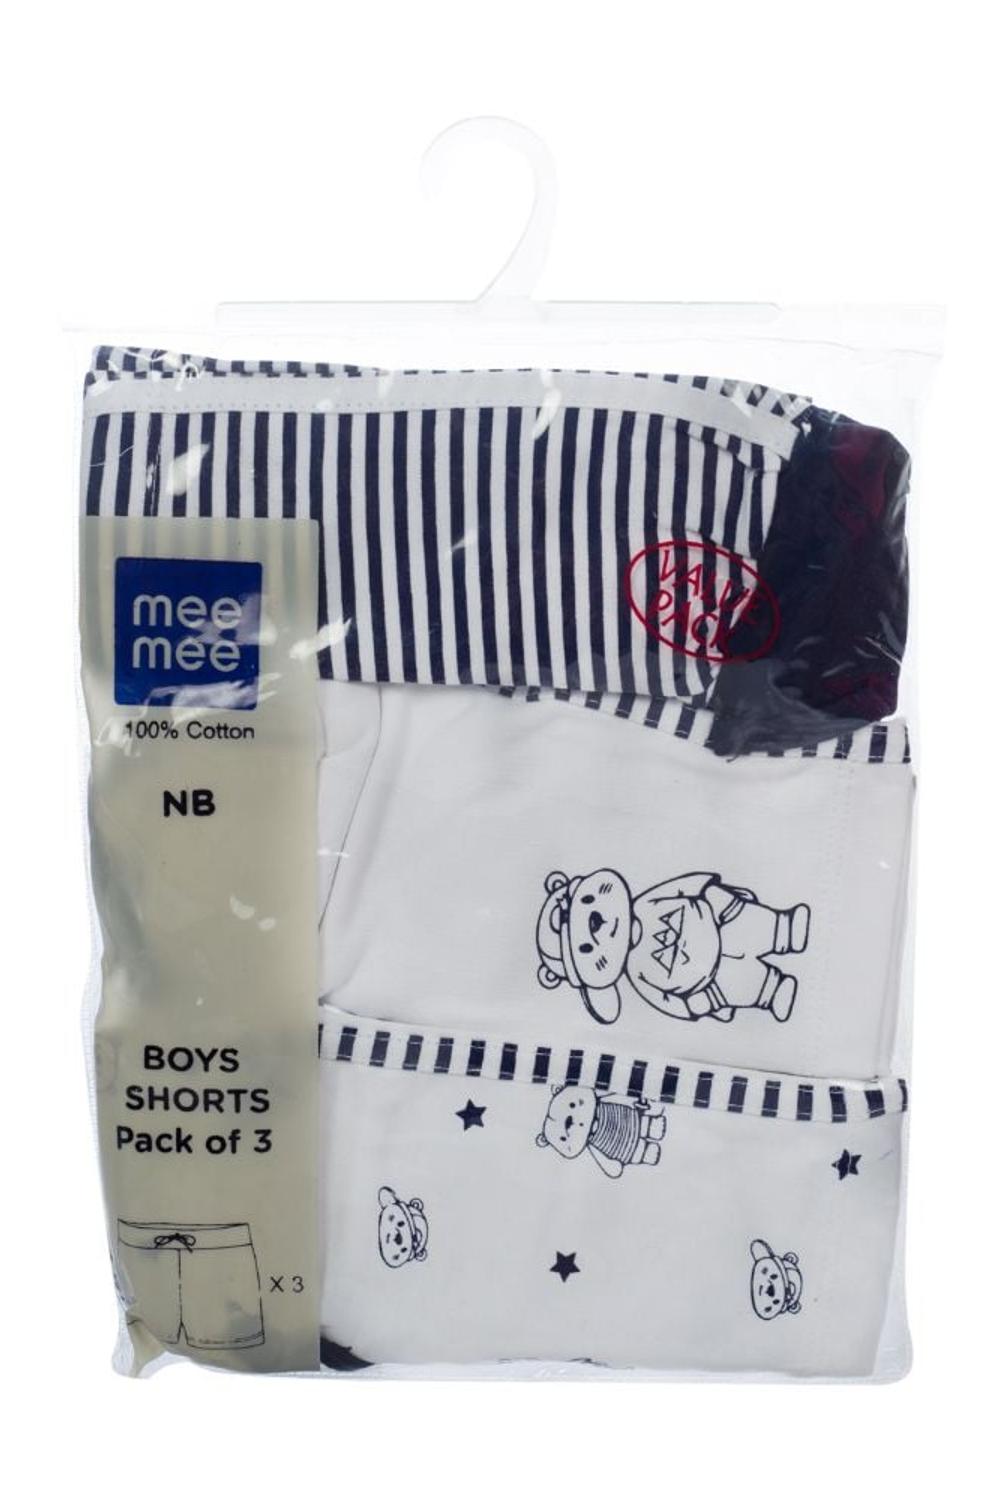 Mee Mee Baby Navy Blue &Amp White Shorts - Pack Of 3